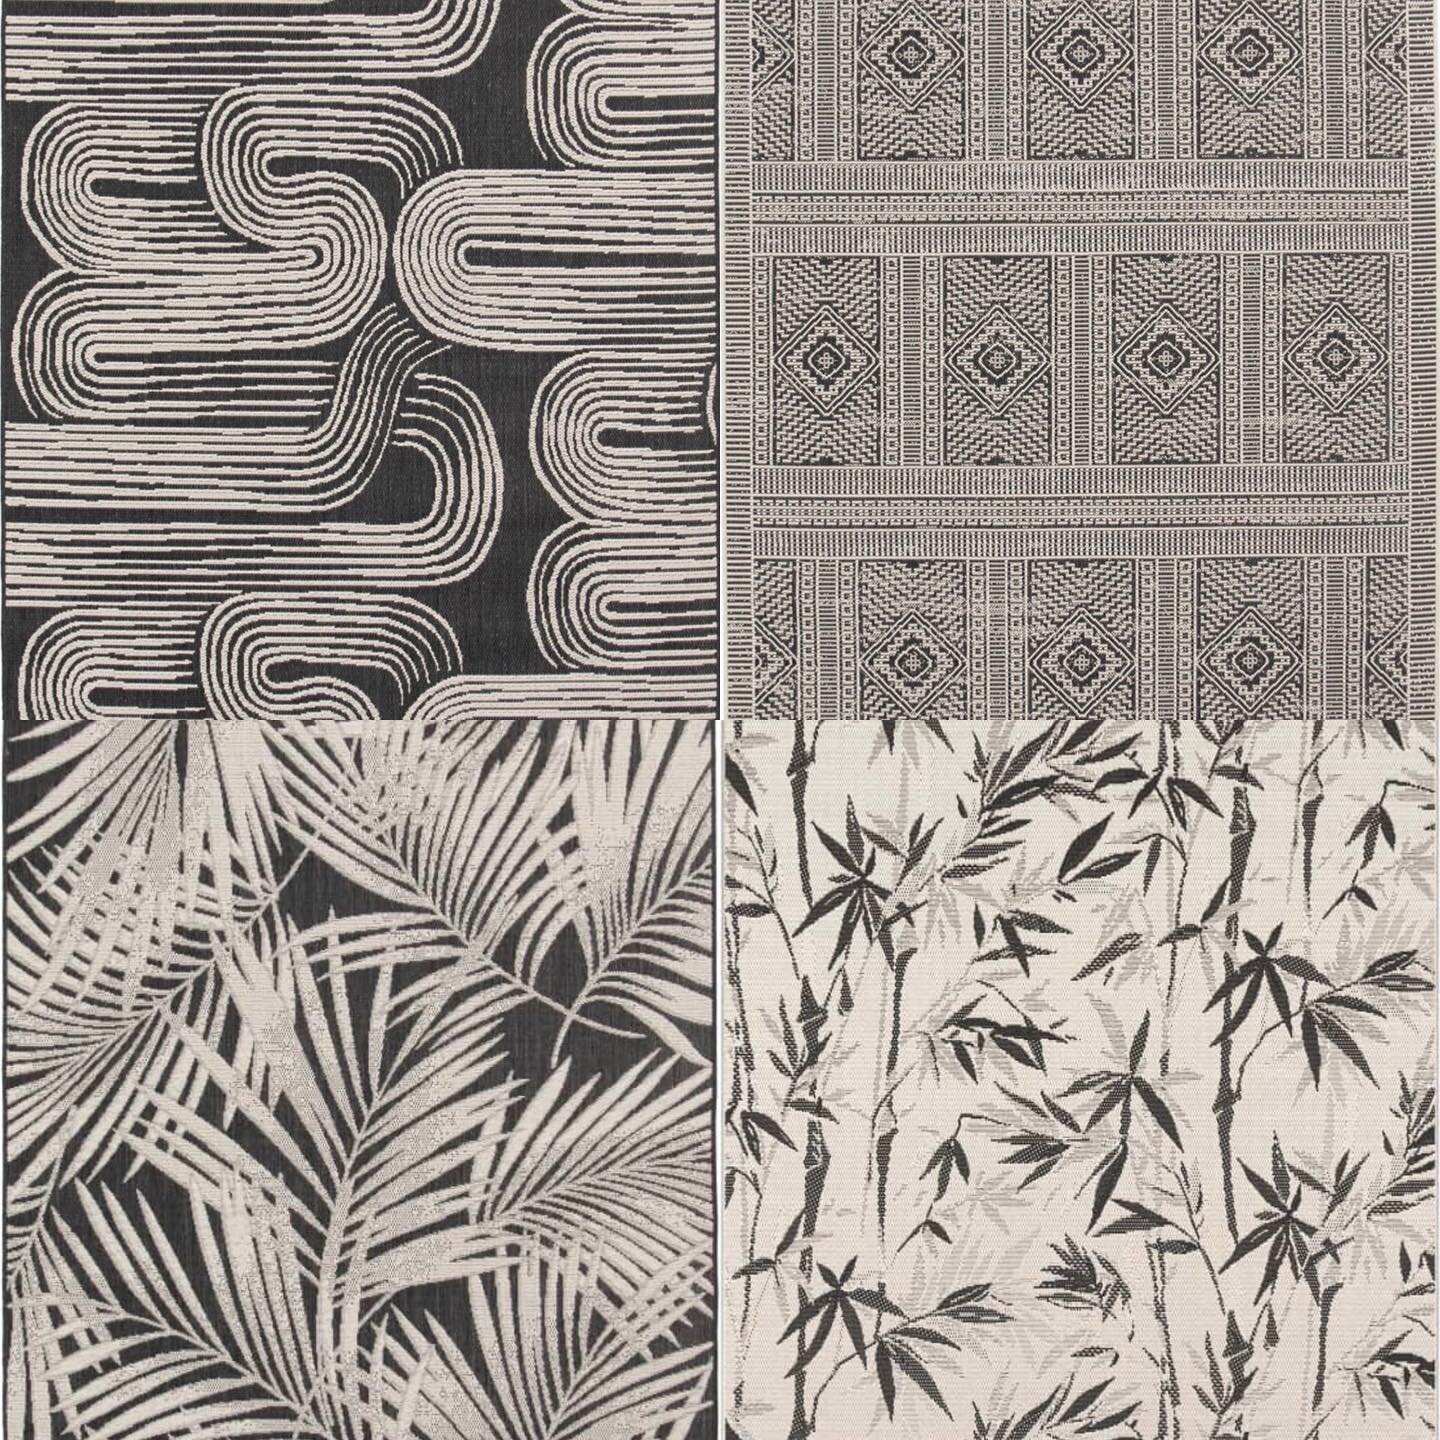 ▪️
N E W  D E S I G N S . . 
▪️
If you love BLACK &amp; WHITE you are going to love these . .
INDOOR/OUTDOOR
Totally washable
▪️
160 x 230 $ 295
200 x 290 $ 450
▪️
#rugs
#indoorrugs
#outdoorrugs
#floor
#flooring
#ruglove
#brisbanerugs
#rugshopping
#k